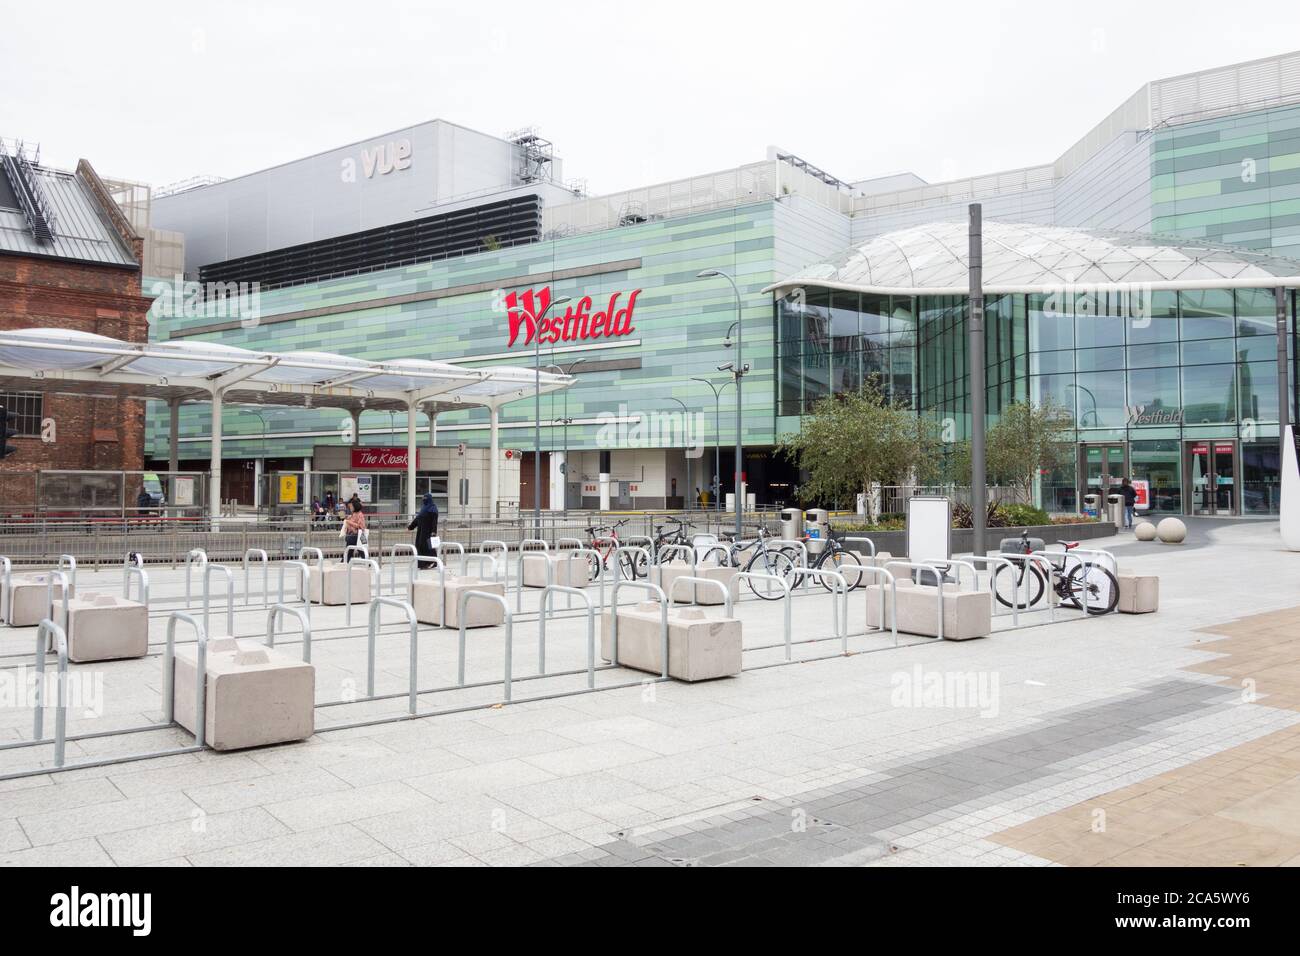 File:Westfield White City shopping centre deserted in April 2020